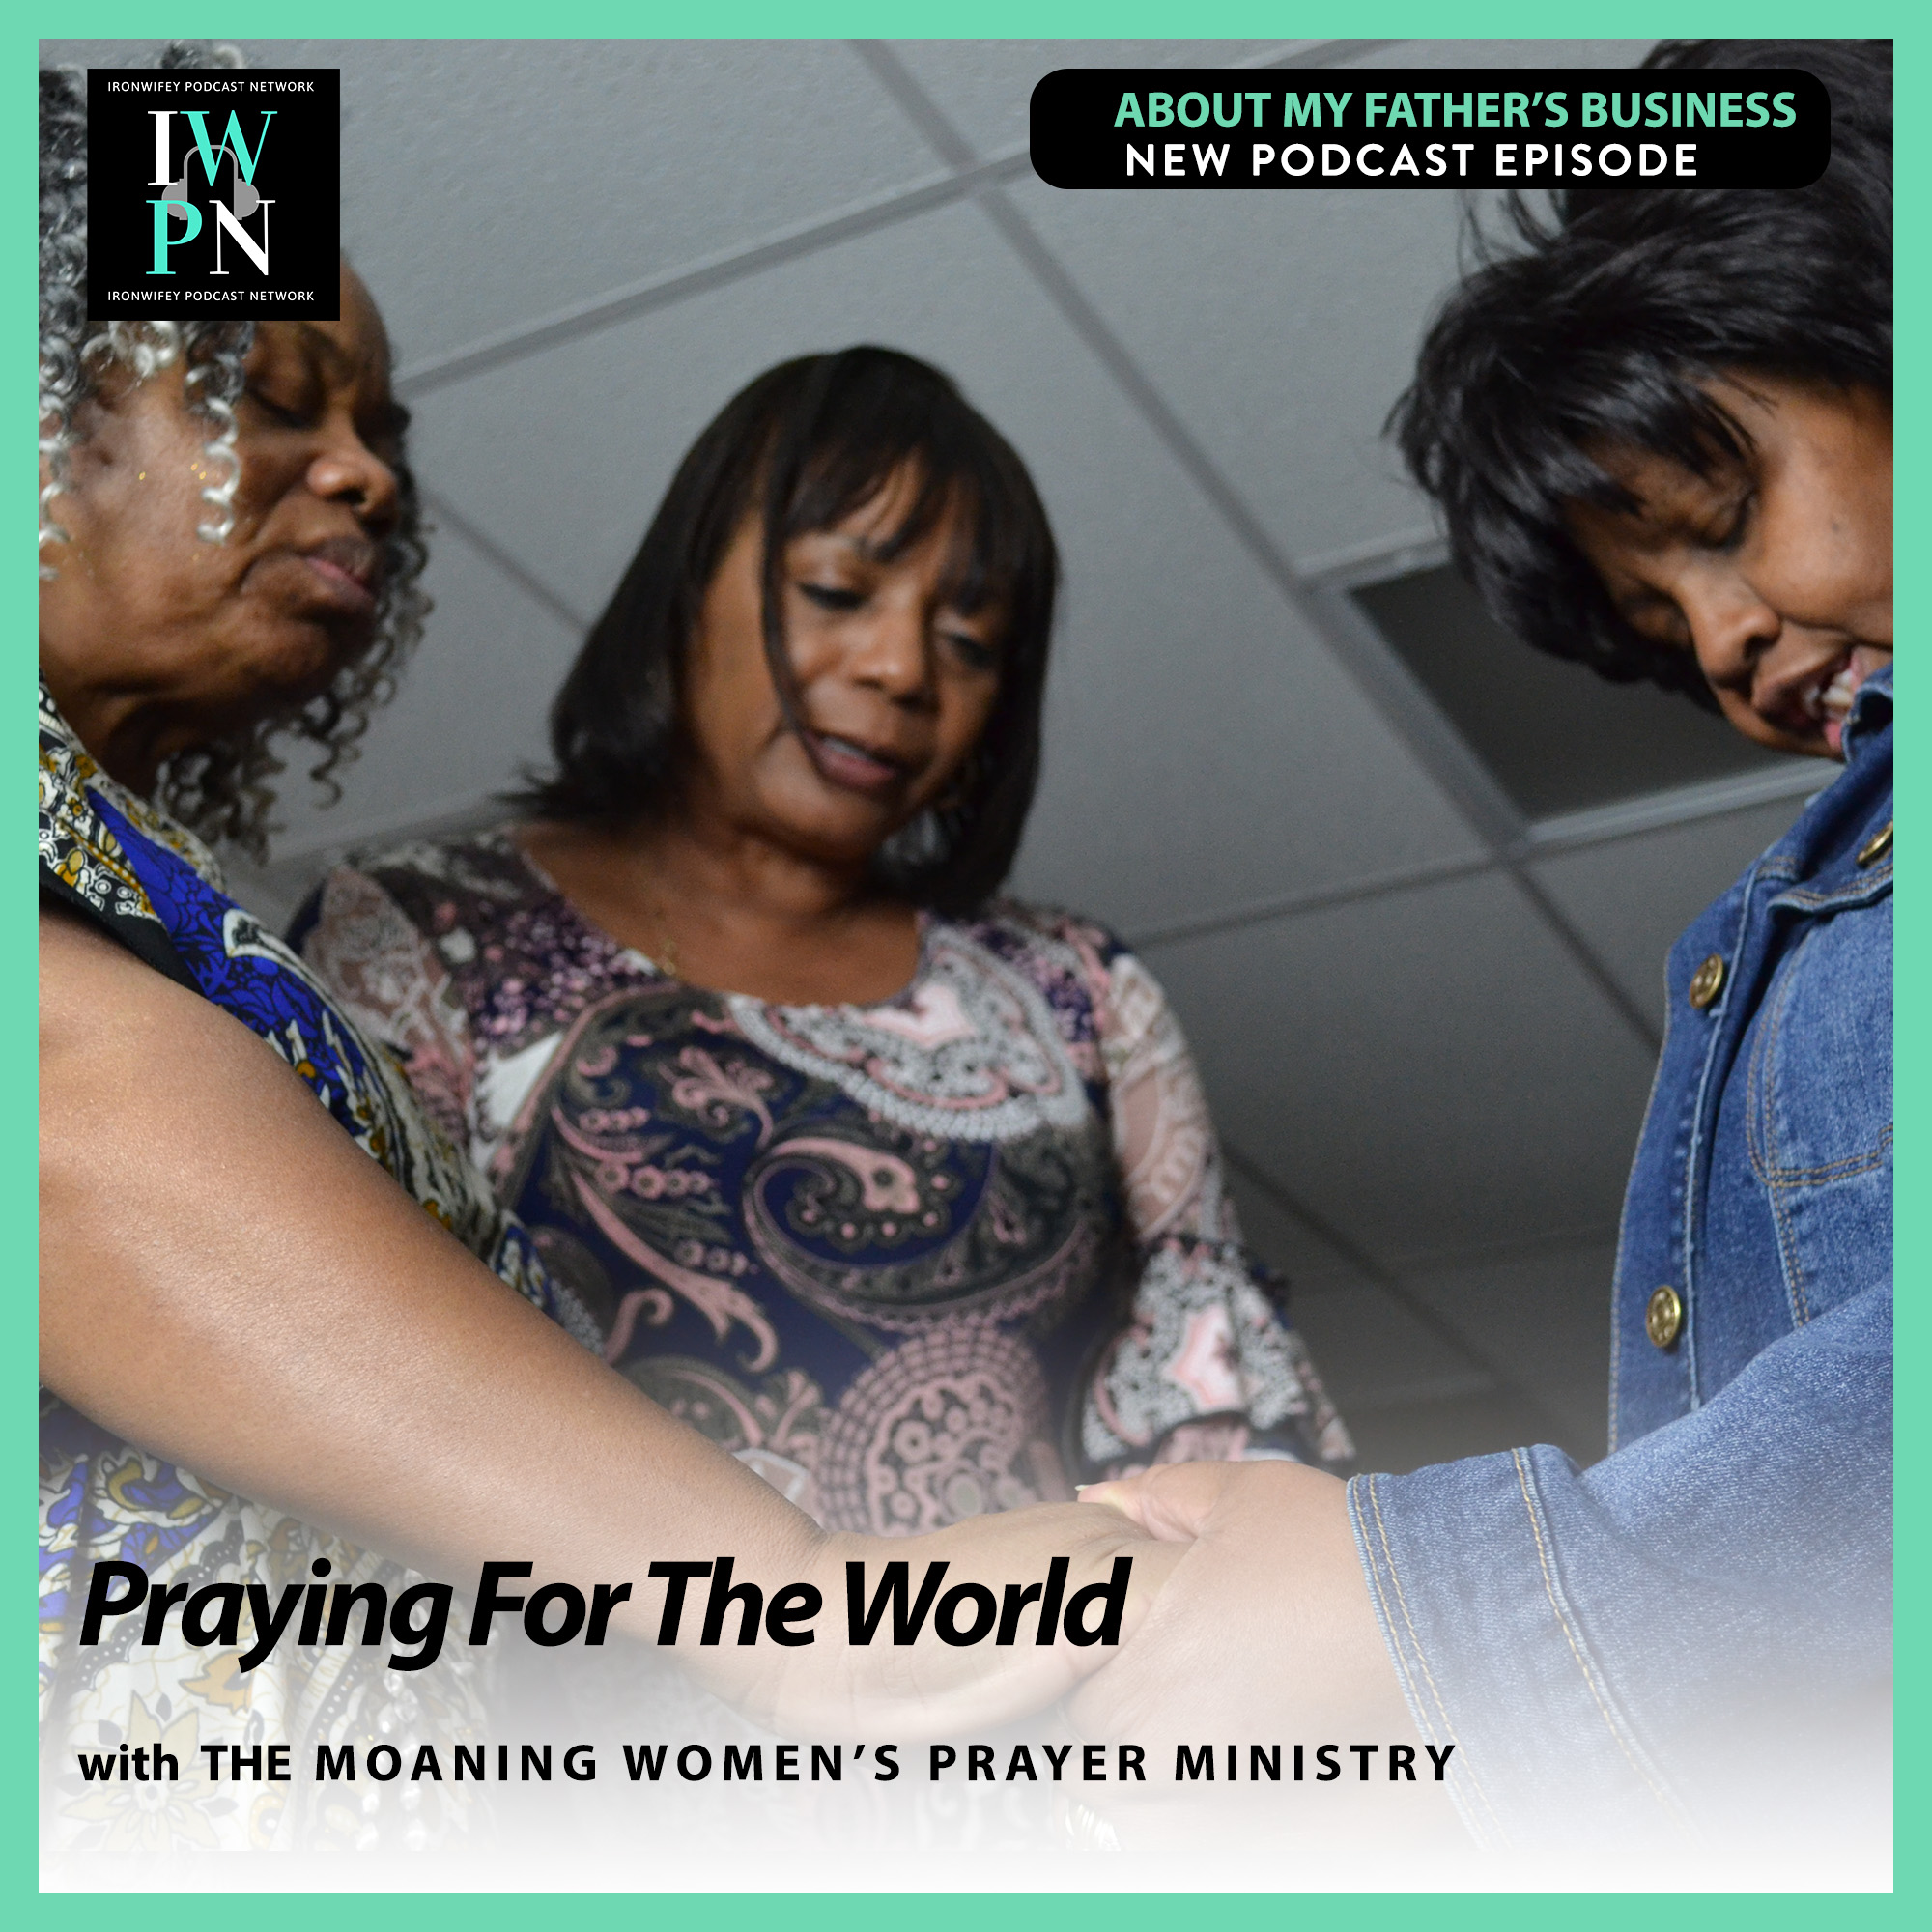 About My Father‘s Business with The Moaning Women‘s Prayer Ministry | Praying For The World